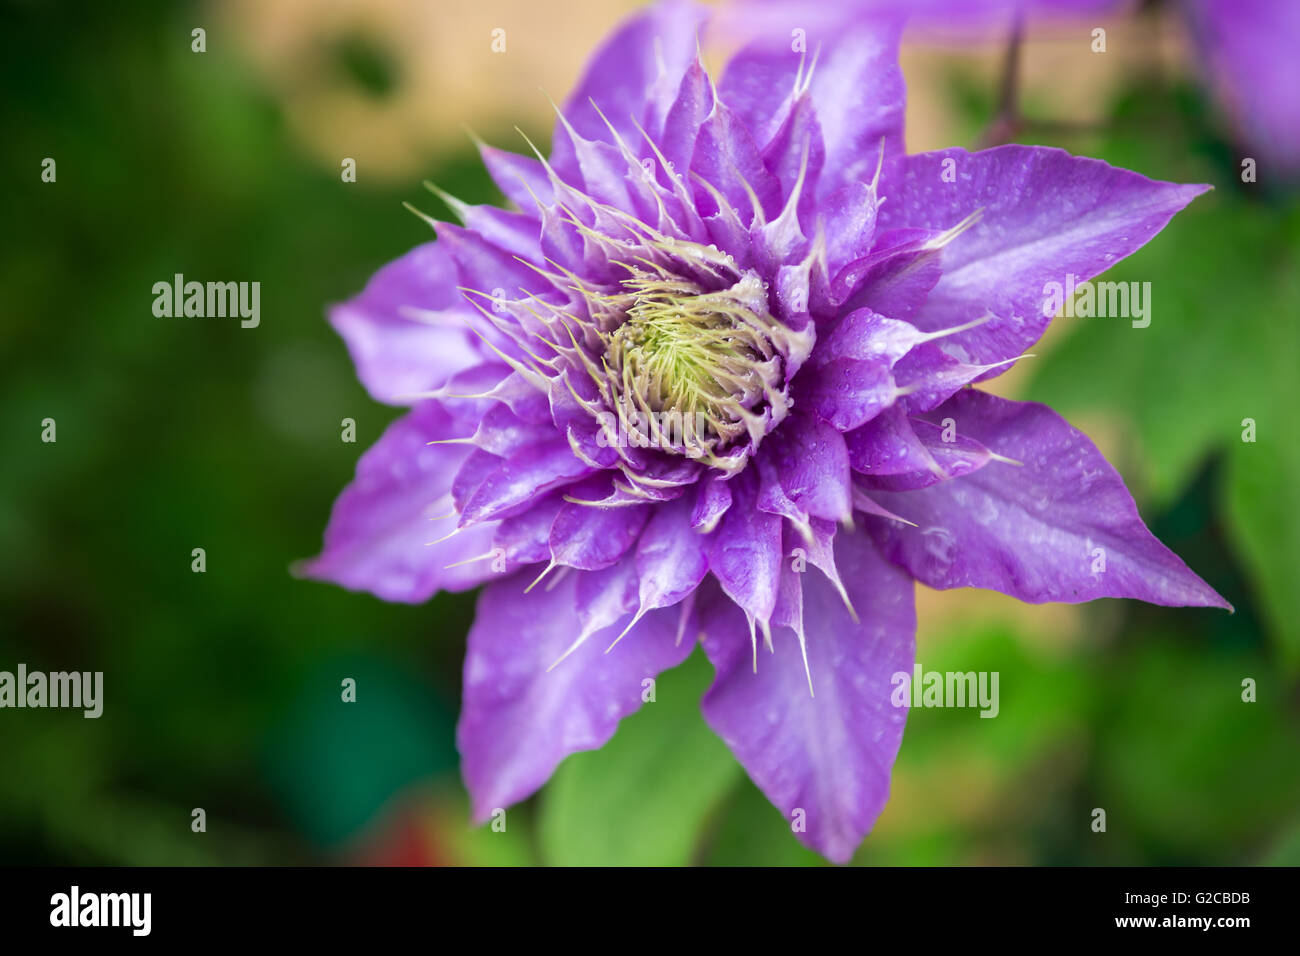 Close up photo of clematis purple flower Stock Photo